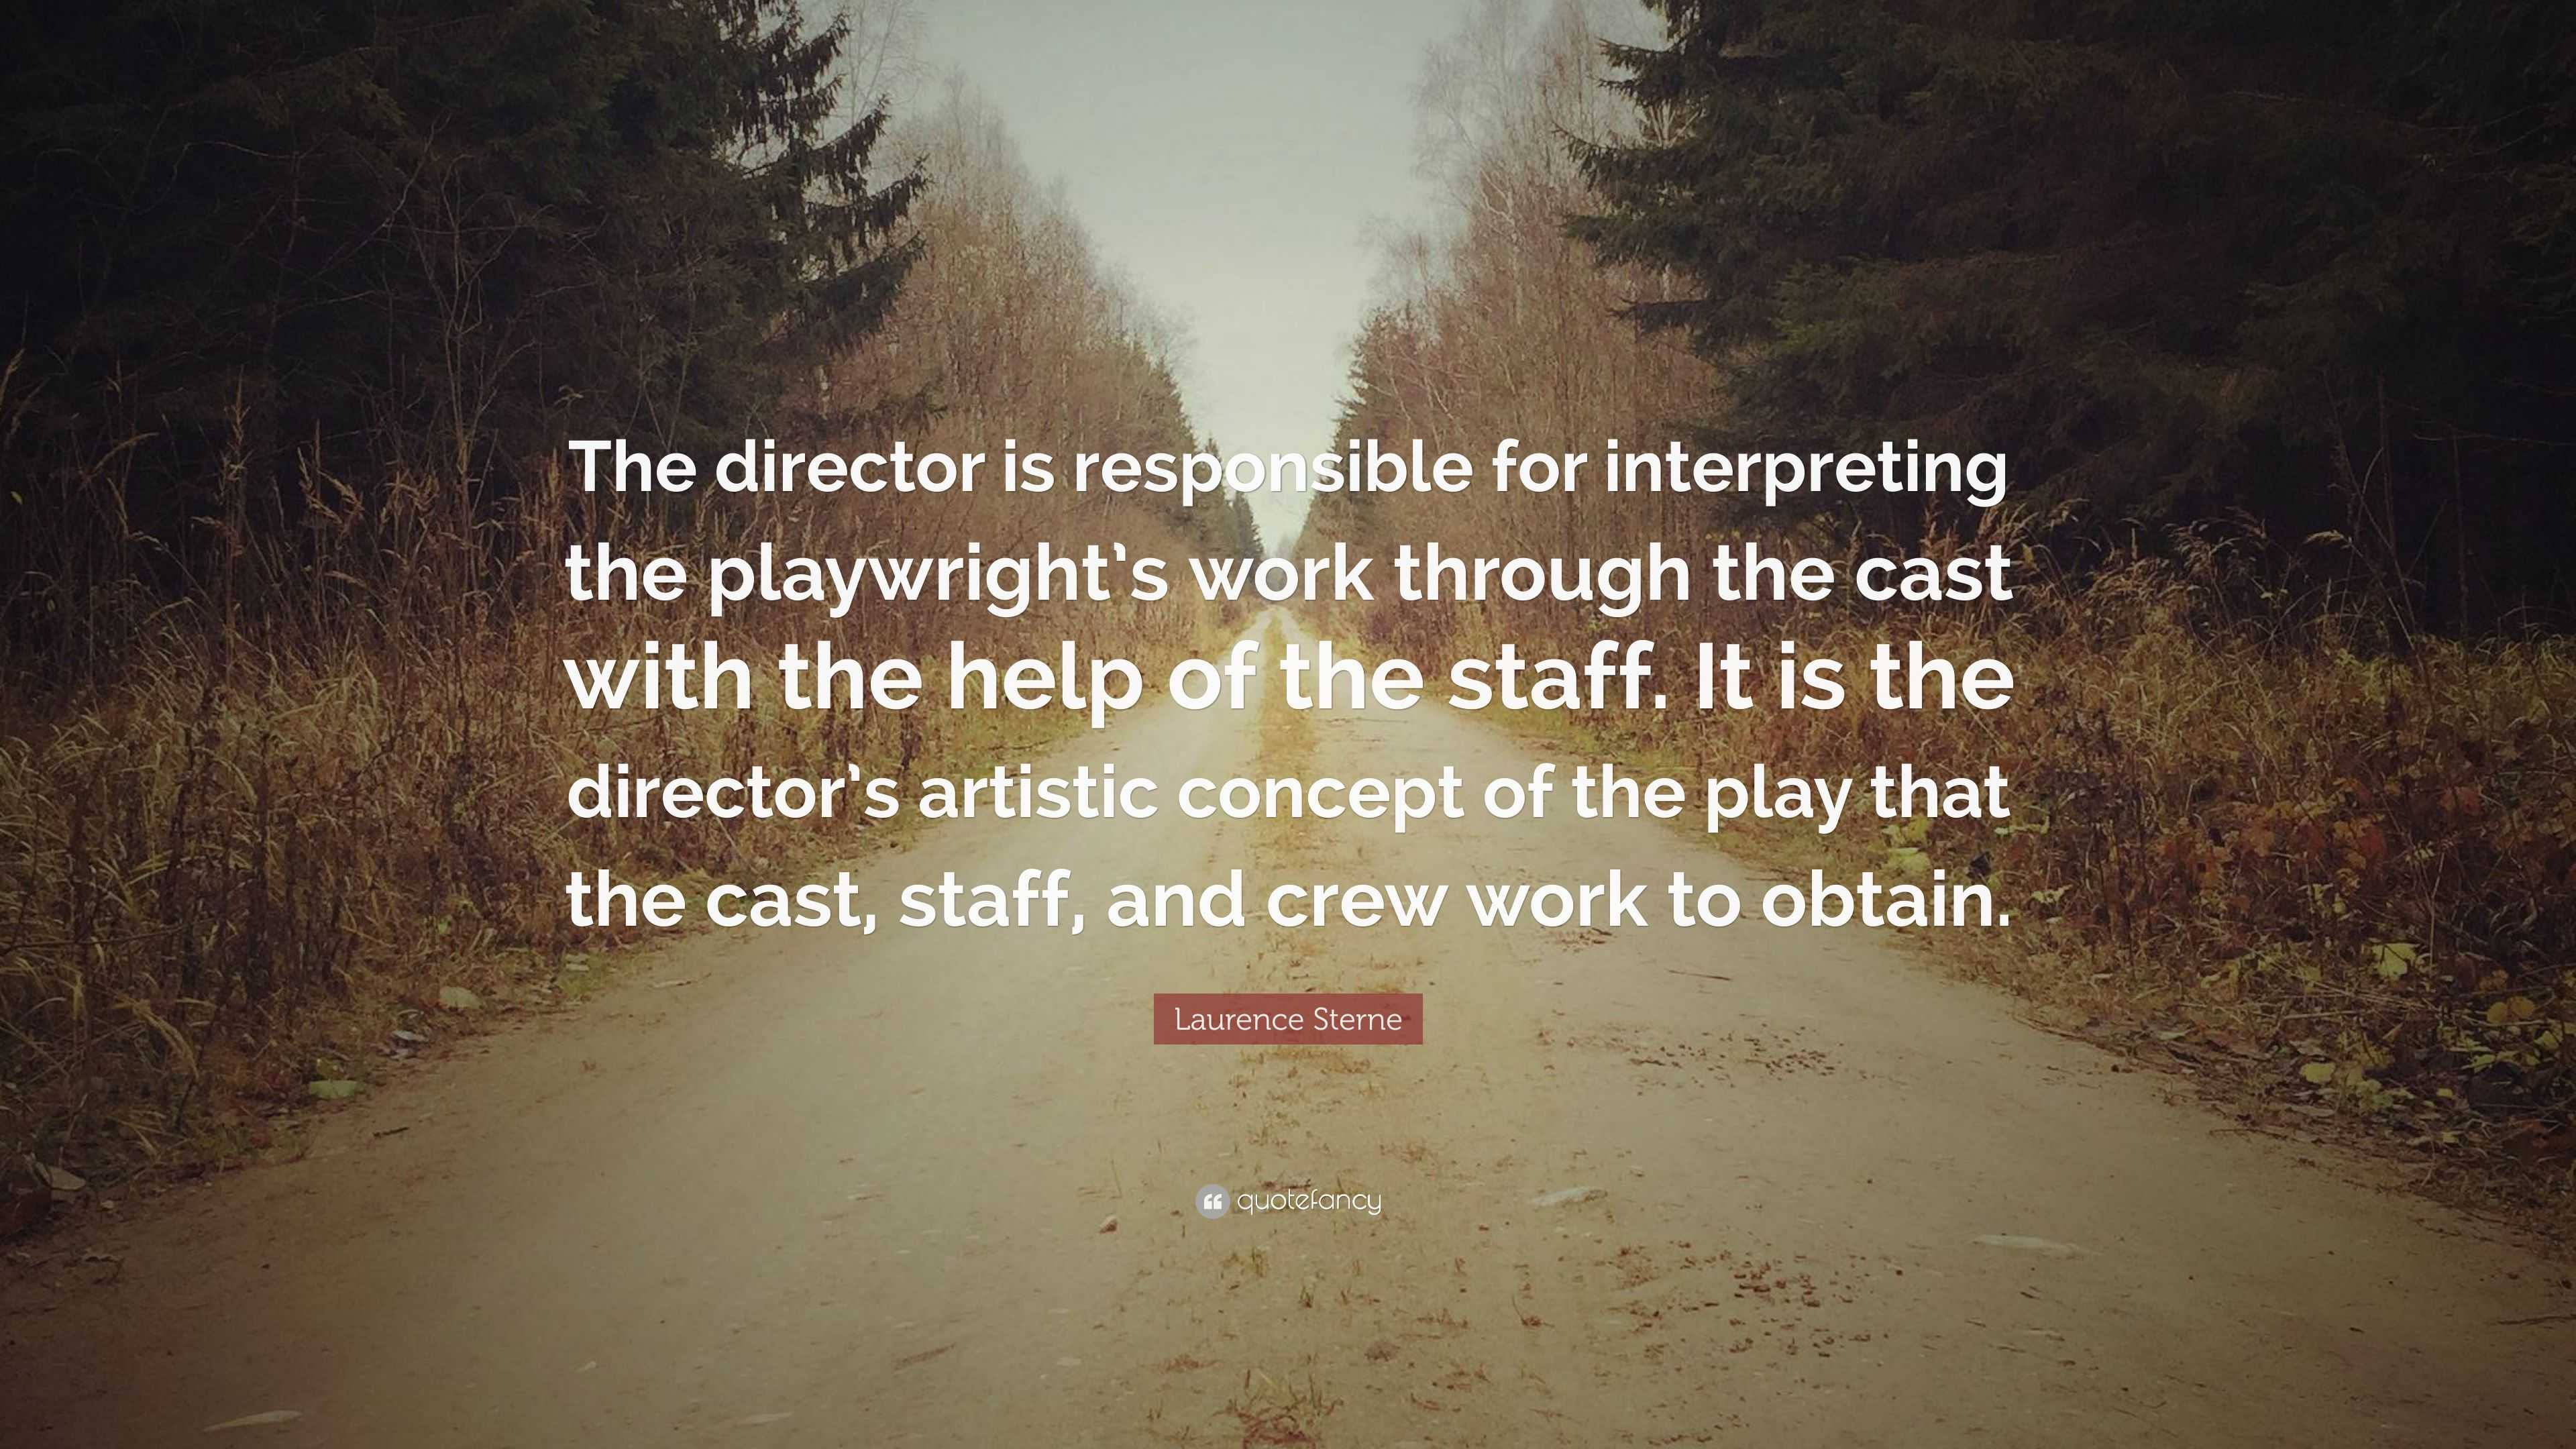 Laurence Sterne Quote: "The director is responsible for ...